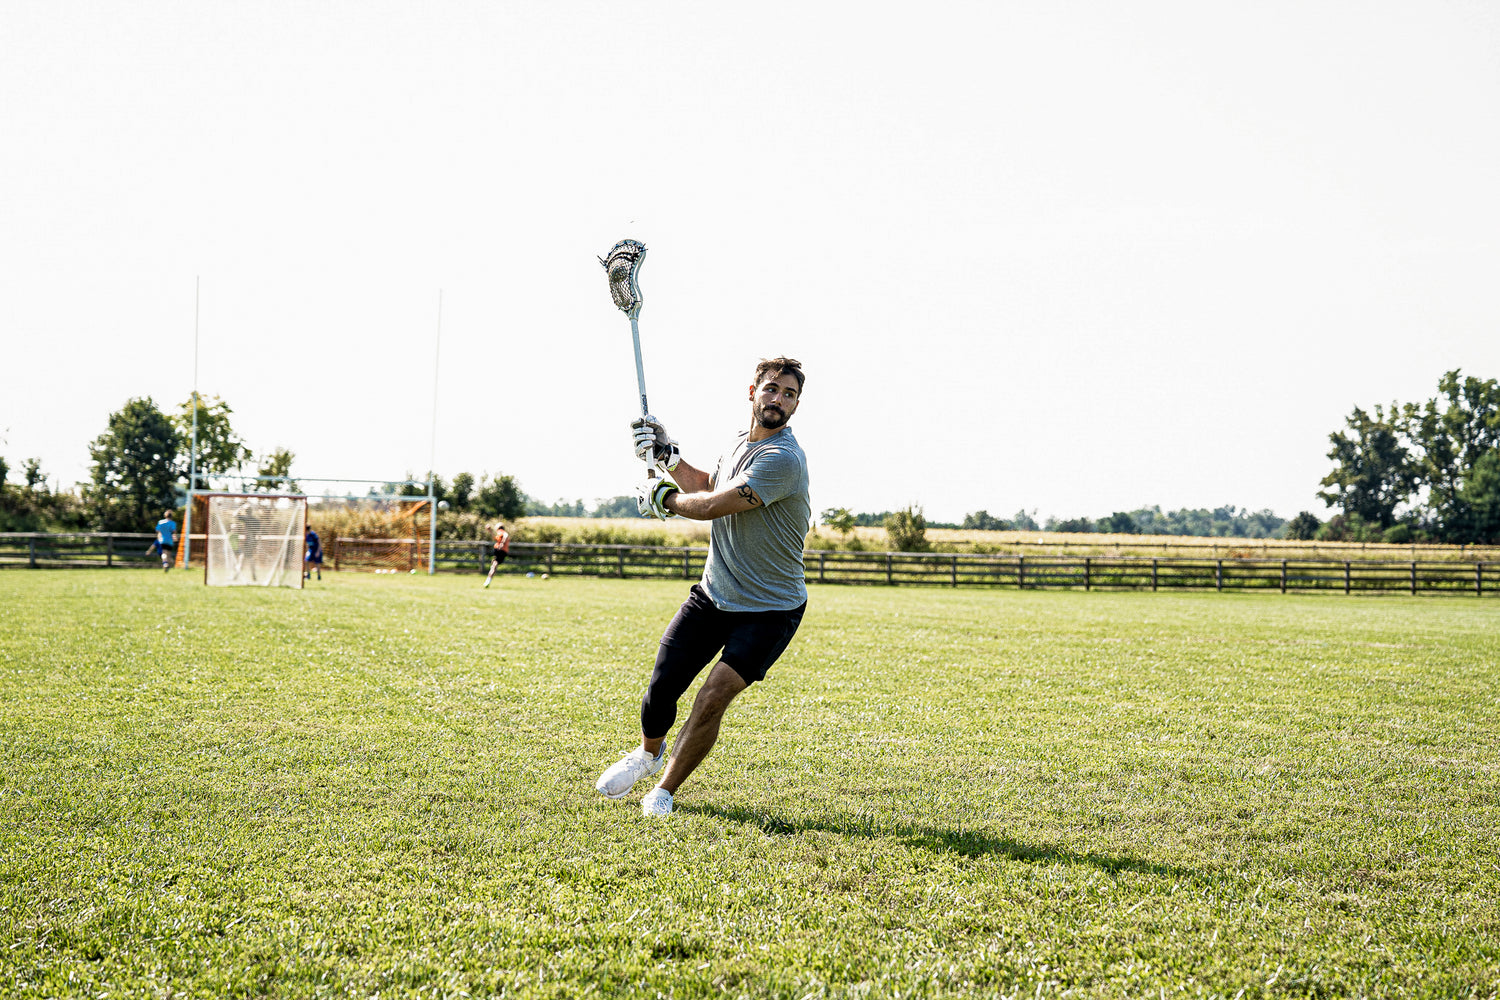 LVLS male athlete wearing black tights standing on a grass hill with a lacrosse stick